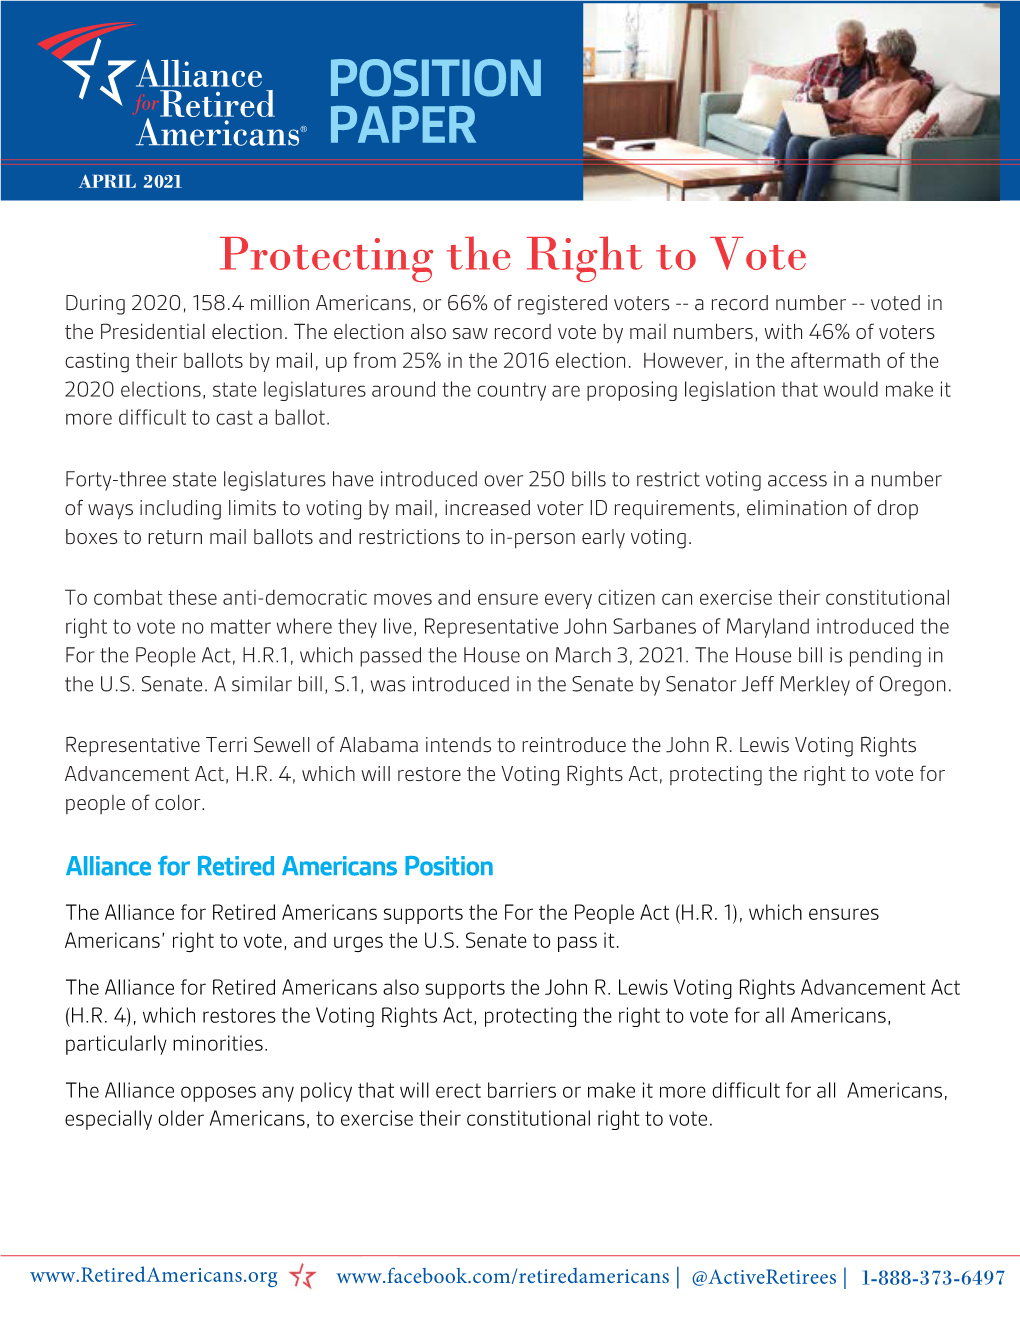 Protecting the Right to Vote 2021